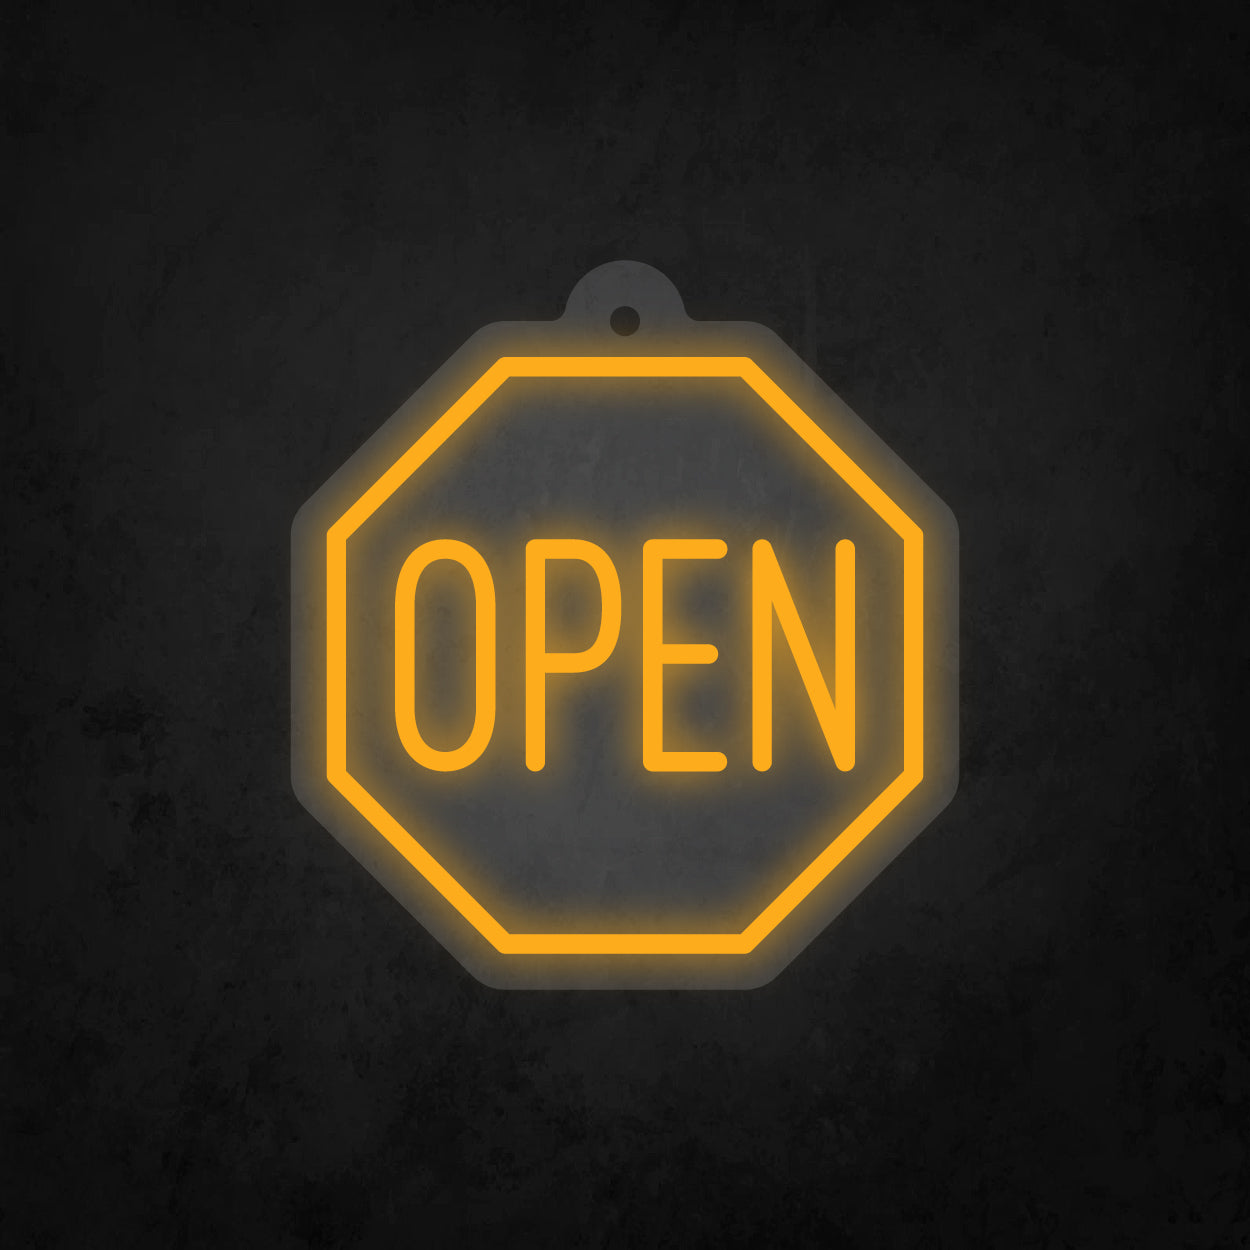 LED Neon Sign - Octagon Open Sign